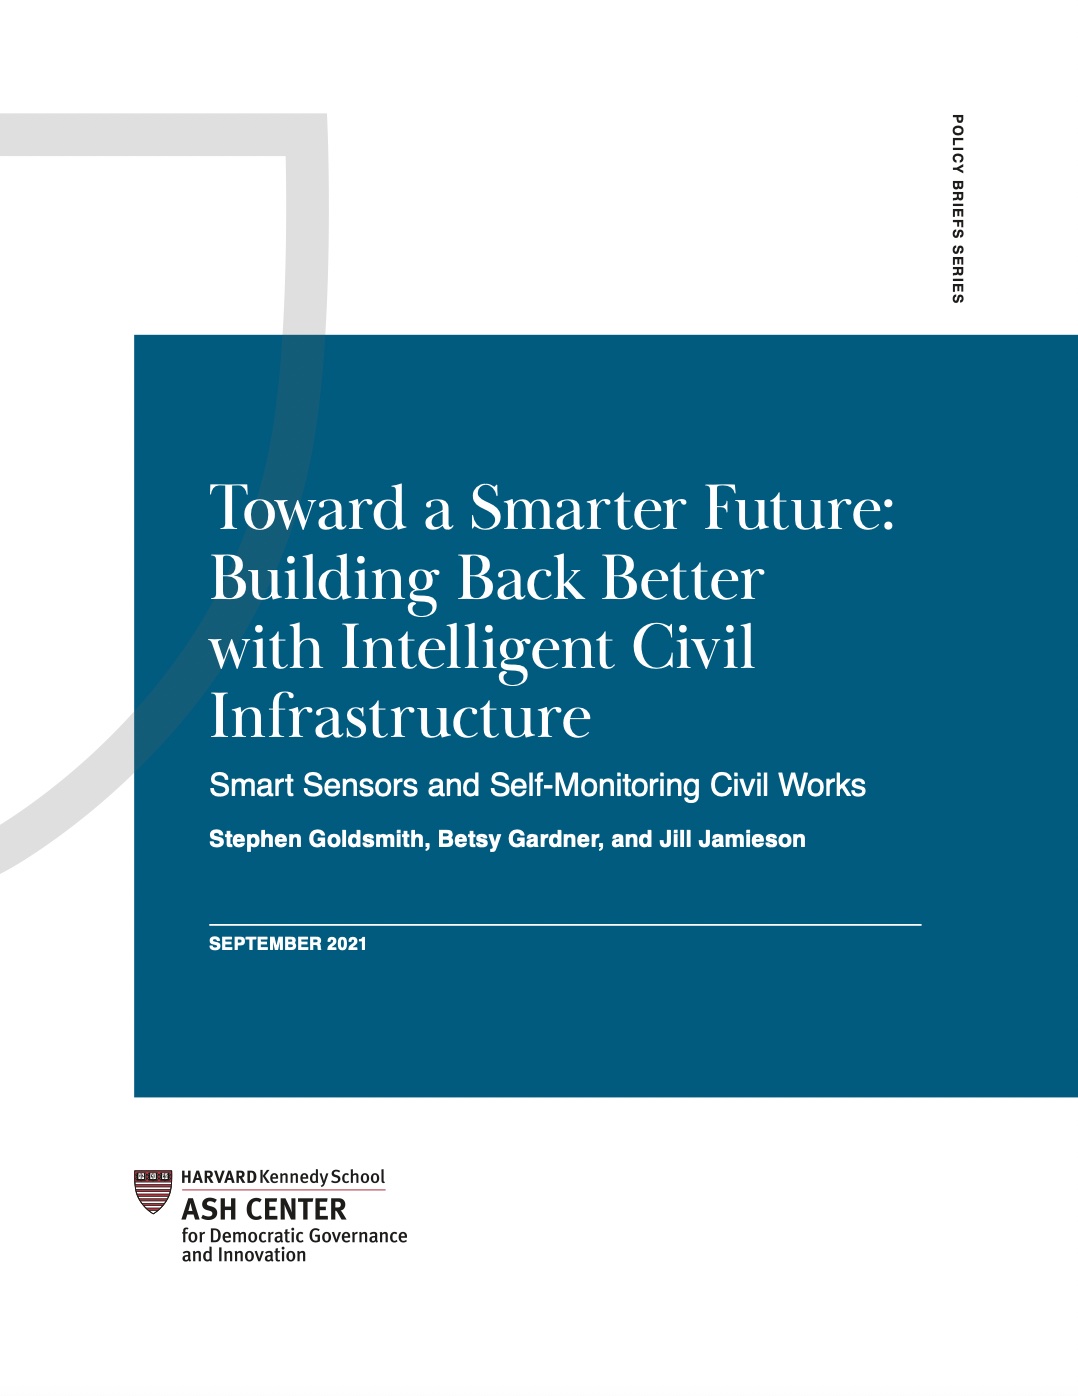 Toward a Smarter Future: Building Back Better with Intelligent Civil Infrastructure -- Smart Sensors and Self-Monitoring Civil Works